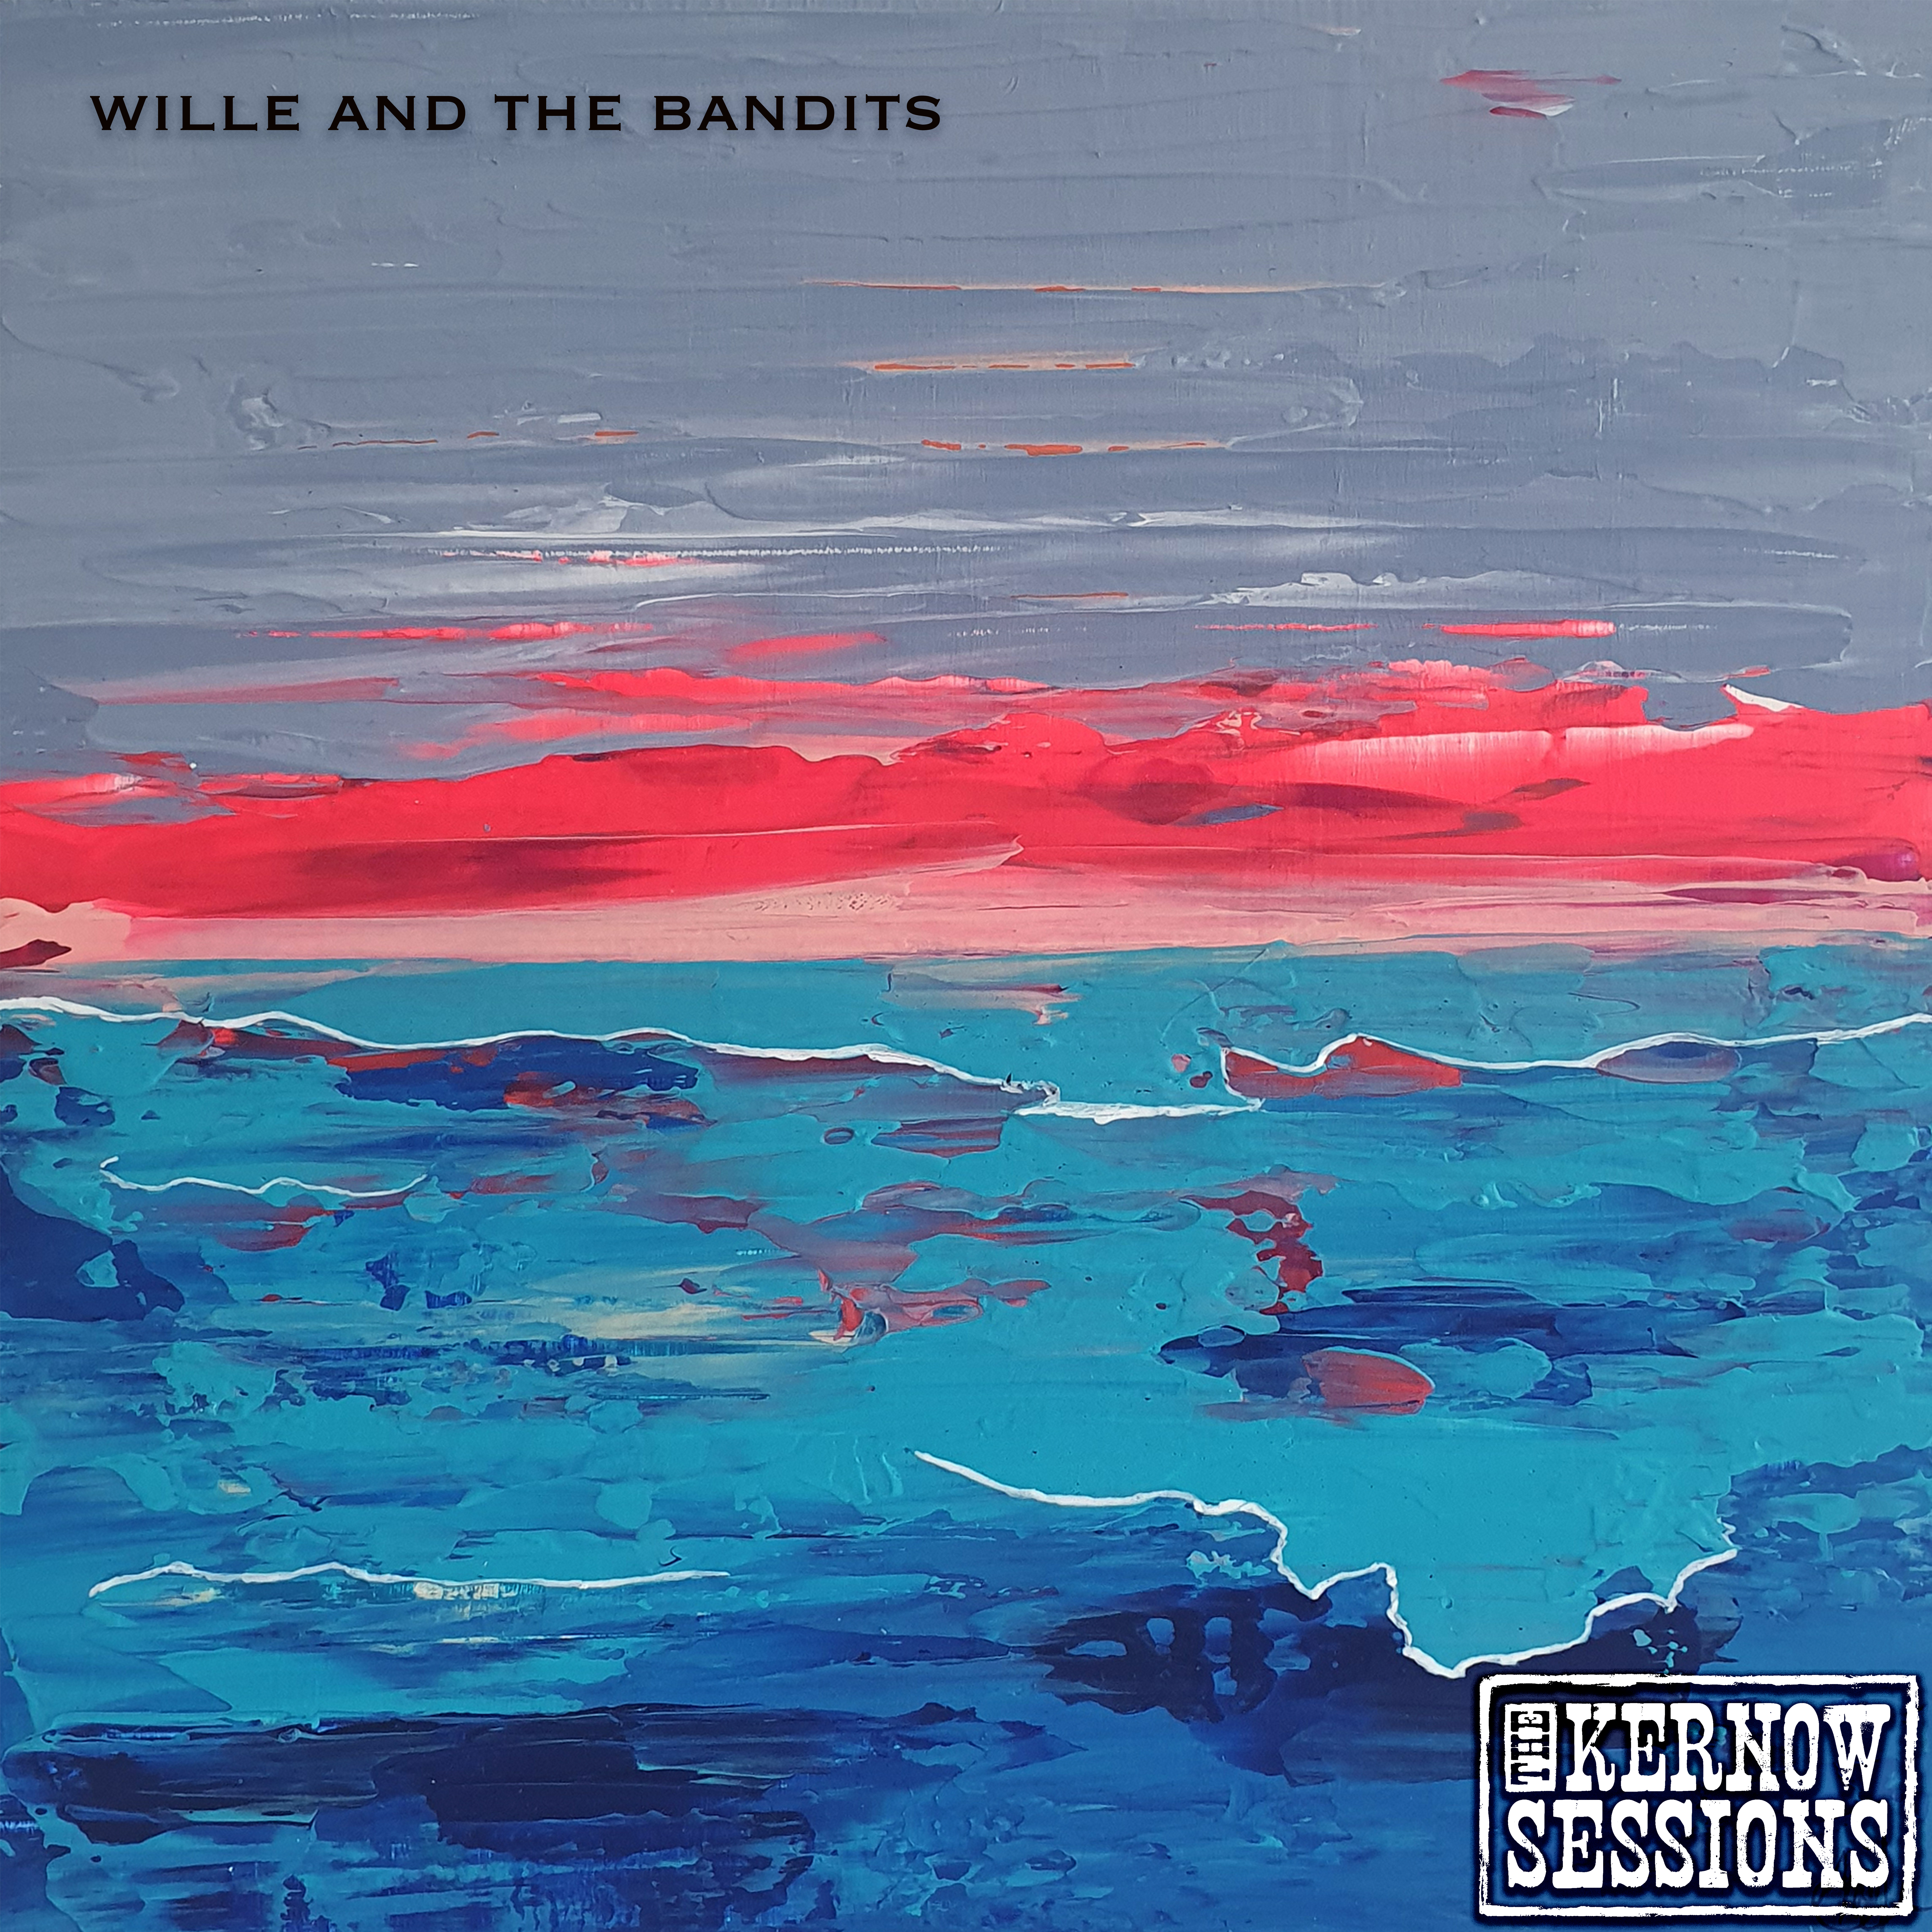 Kernow Sessions CD | Pre Order - Wille and the Bandits